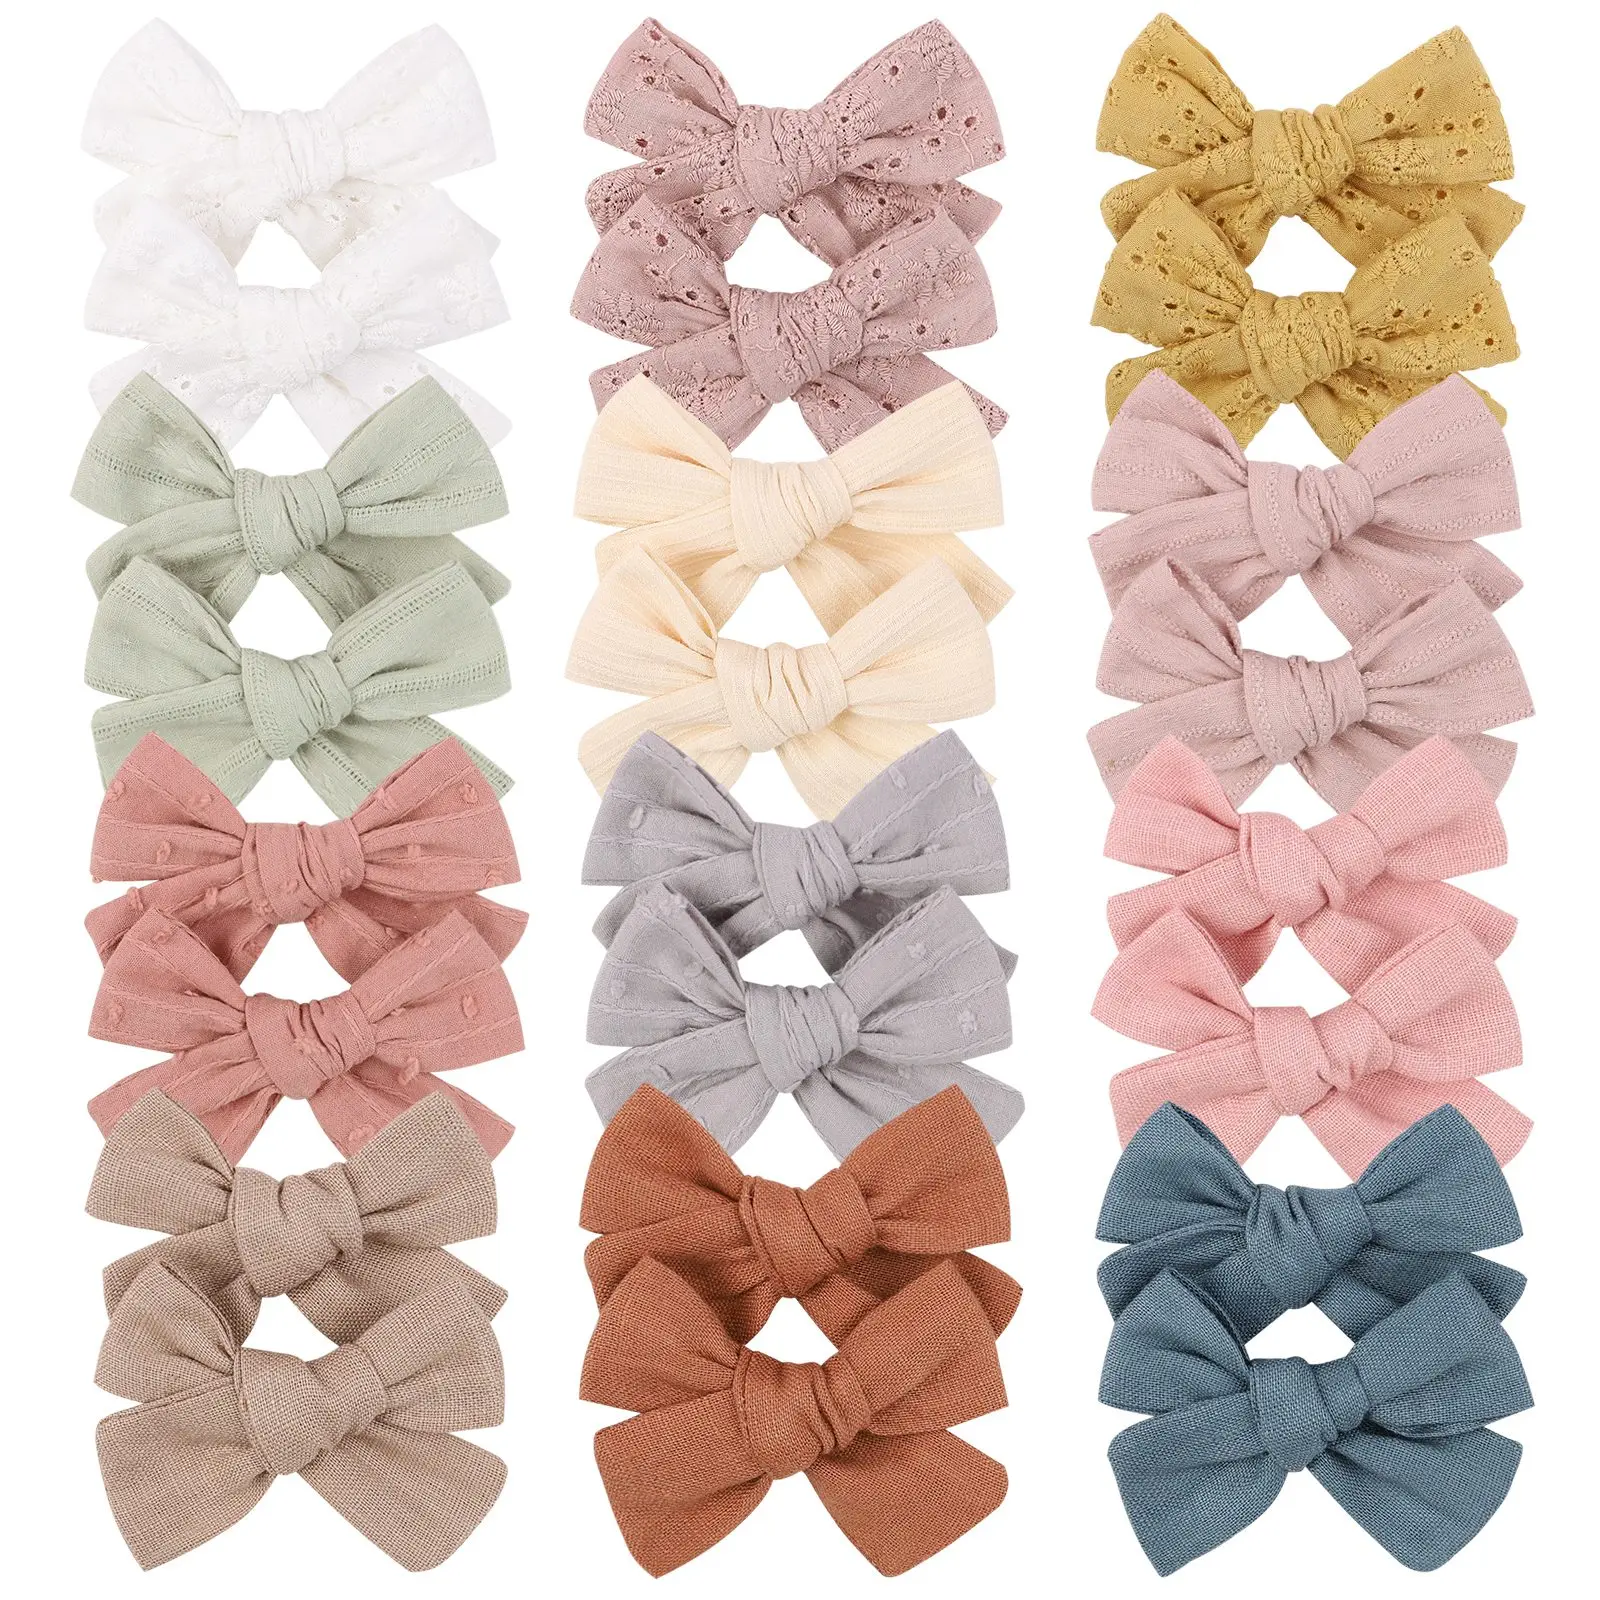 2Pcs/lot 12Colors 3.2Inch Cotton Hair Bows Bowknot With Clips For Girls Hair Clips Cute Barrettes Headwear Kids Hair Accessories